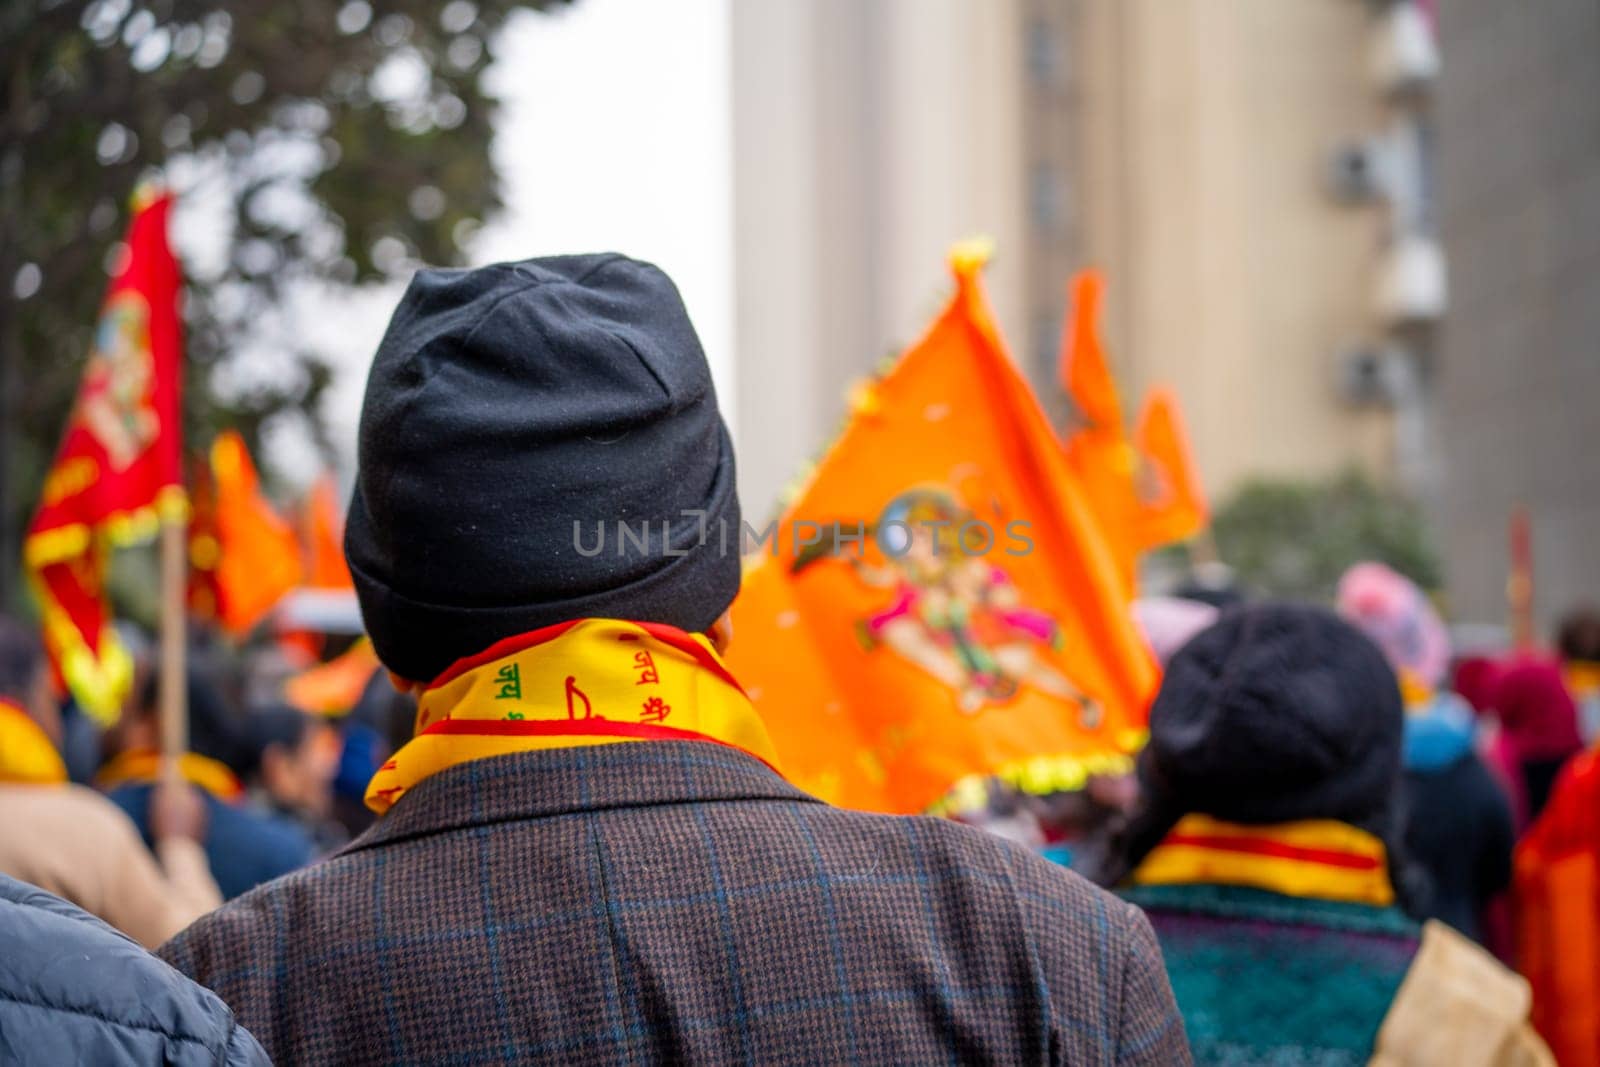 Focus blur shot showing back of old man wearing winter clothes and bhagwa saffron scarf walking with crowd carrying flag celebrating the Pran Pratishtha consecration of Ram mandir temple by Shalinimathur